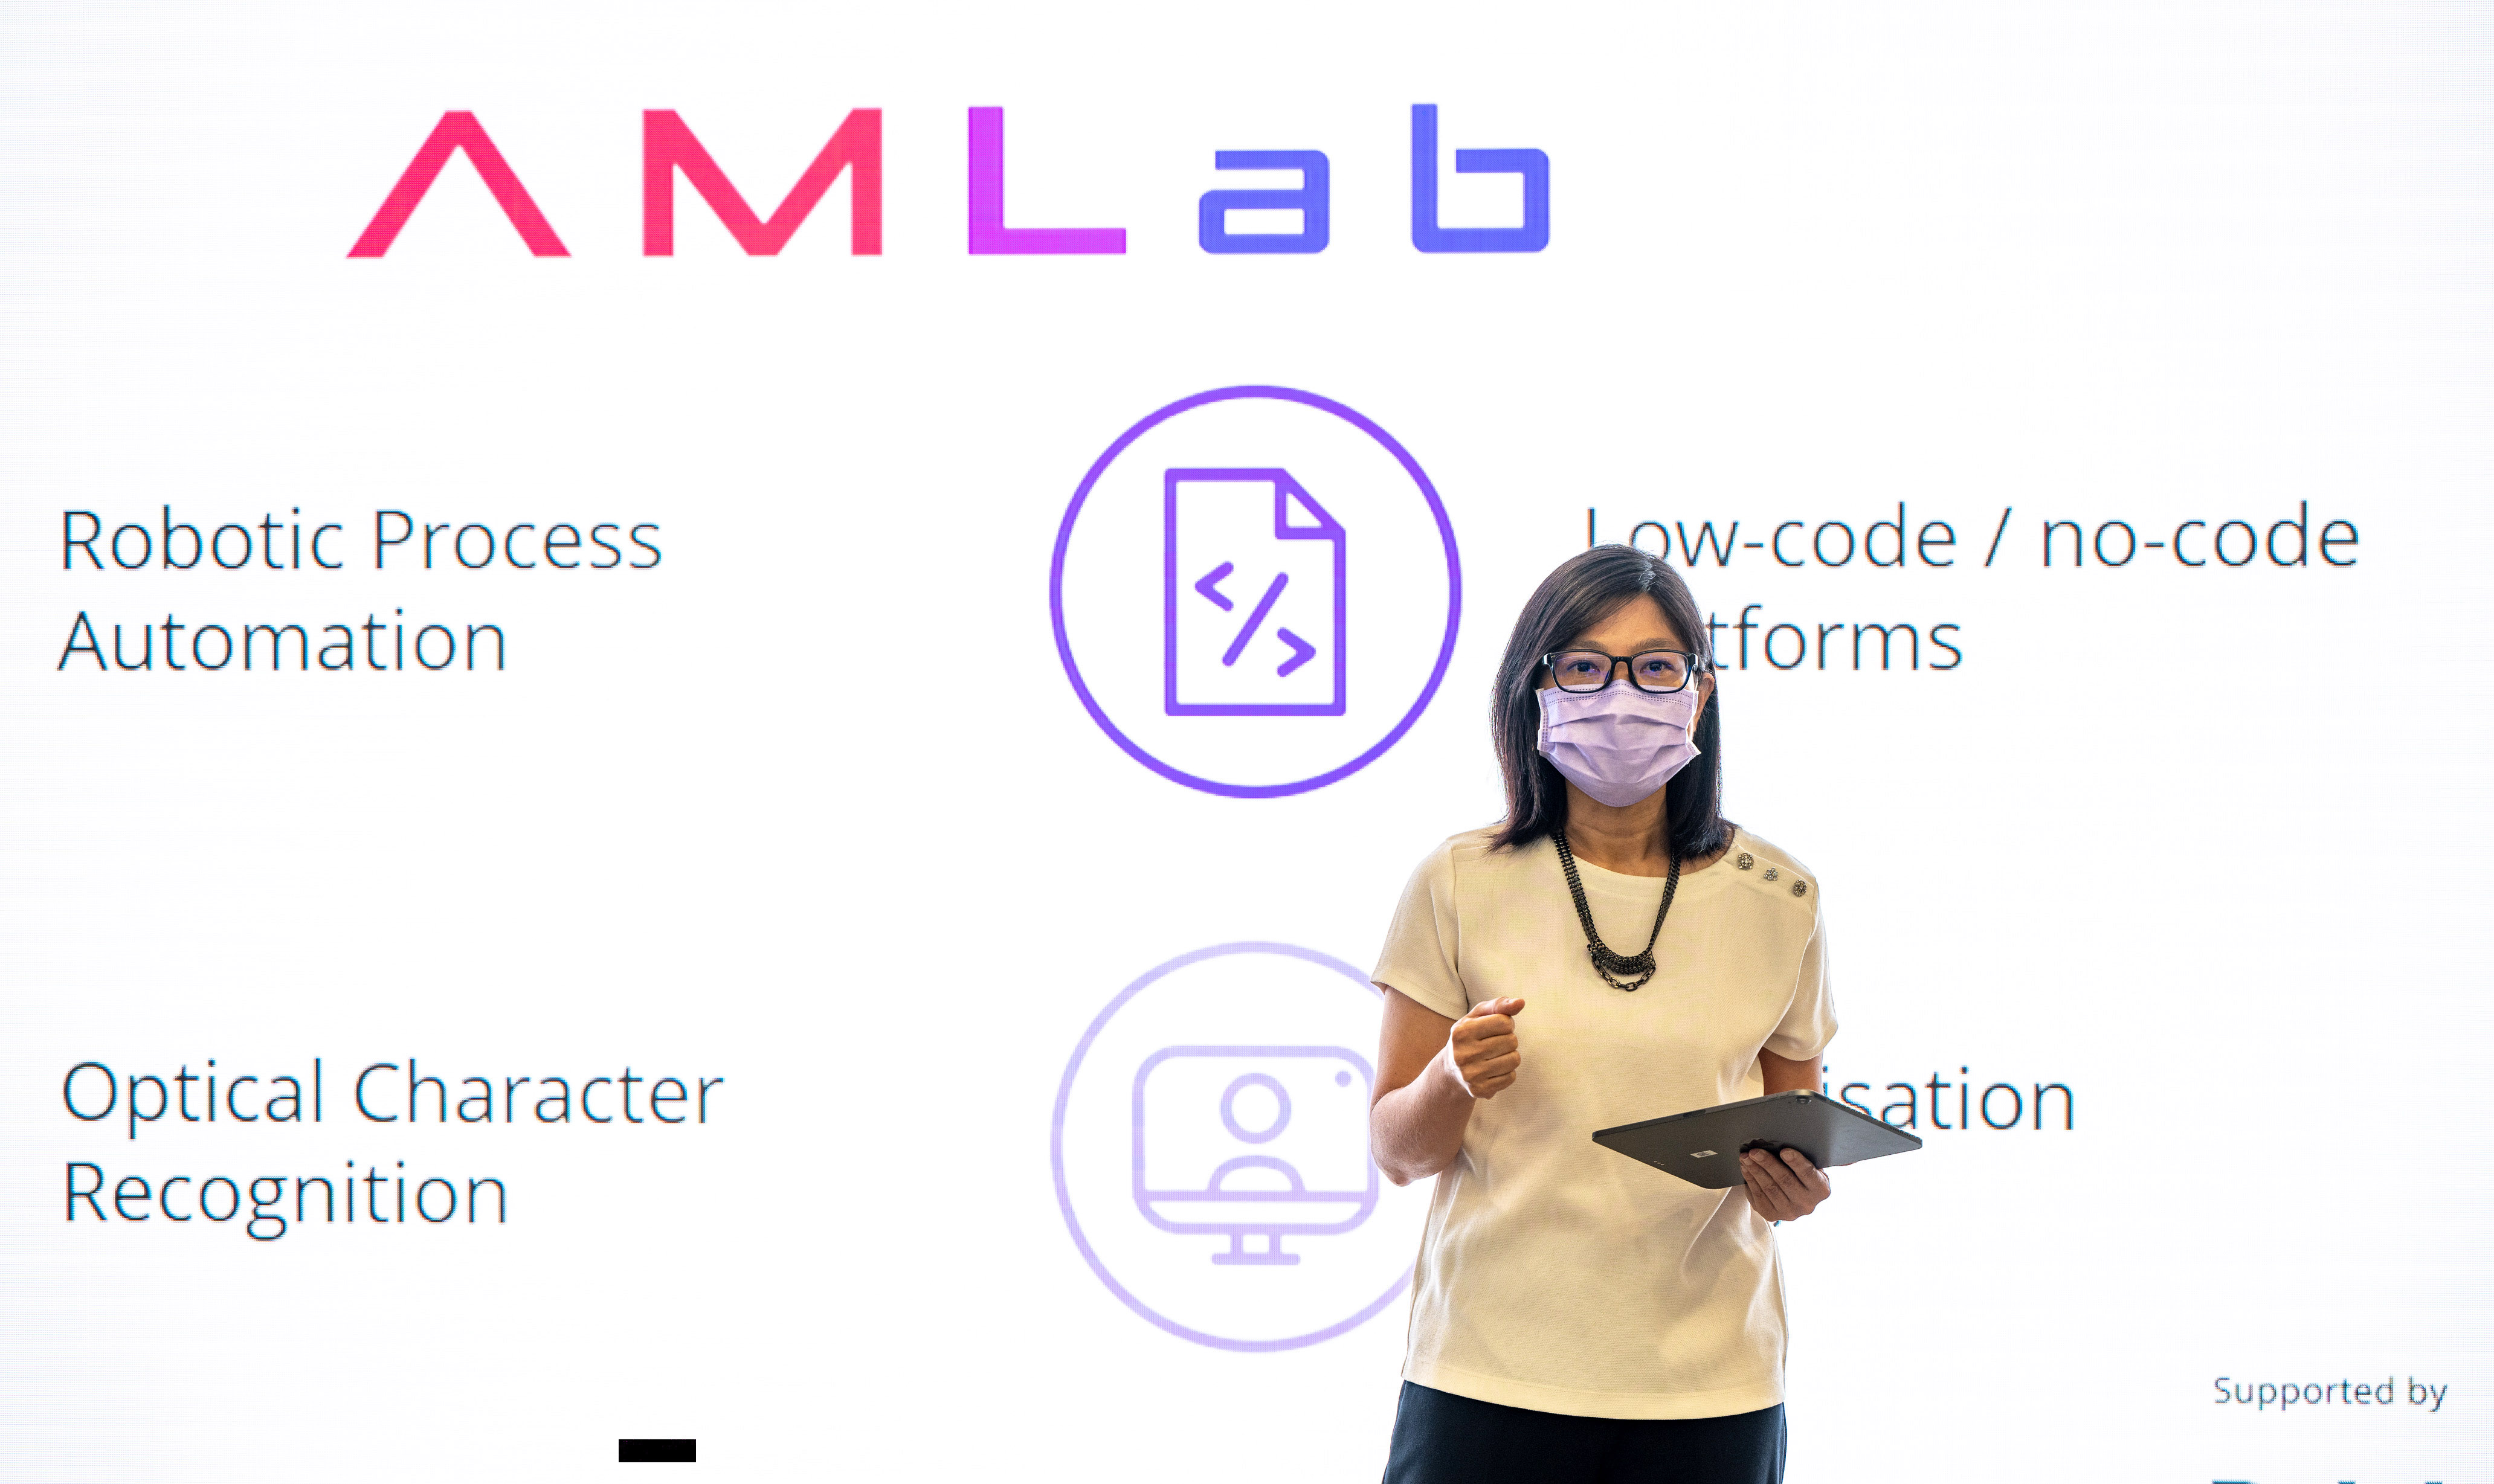 Ms Carmen Chu, Executive Director (Enforcement and AML) of the HKMA delivers remarks at the second AMLab session.